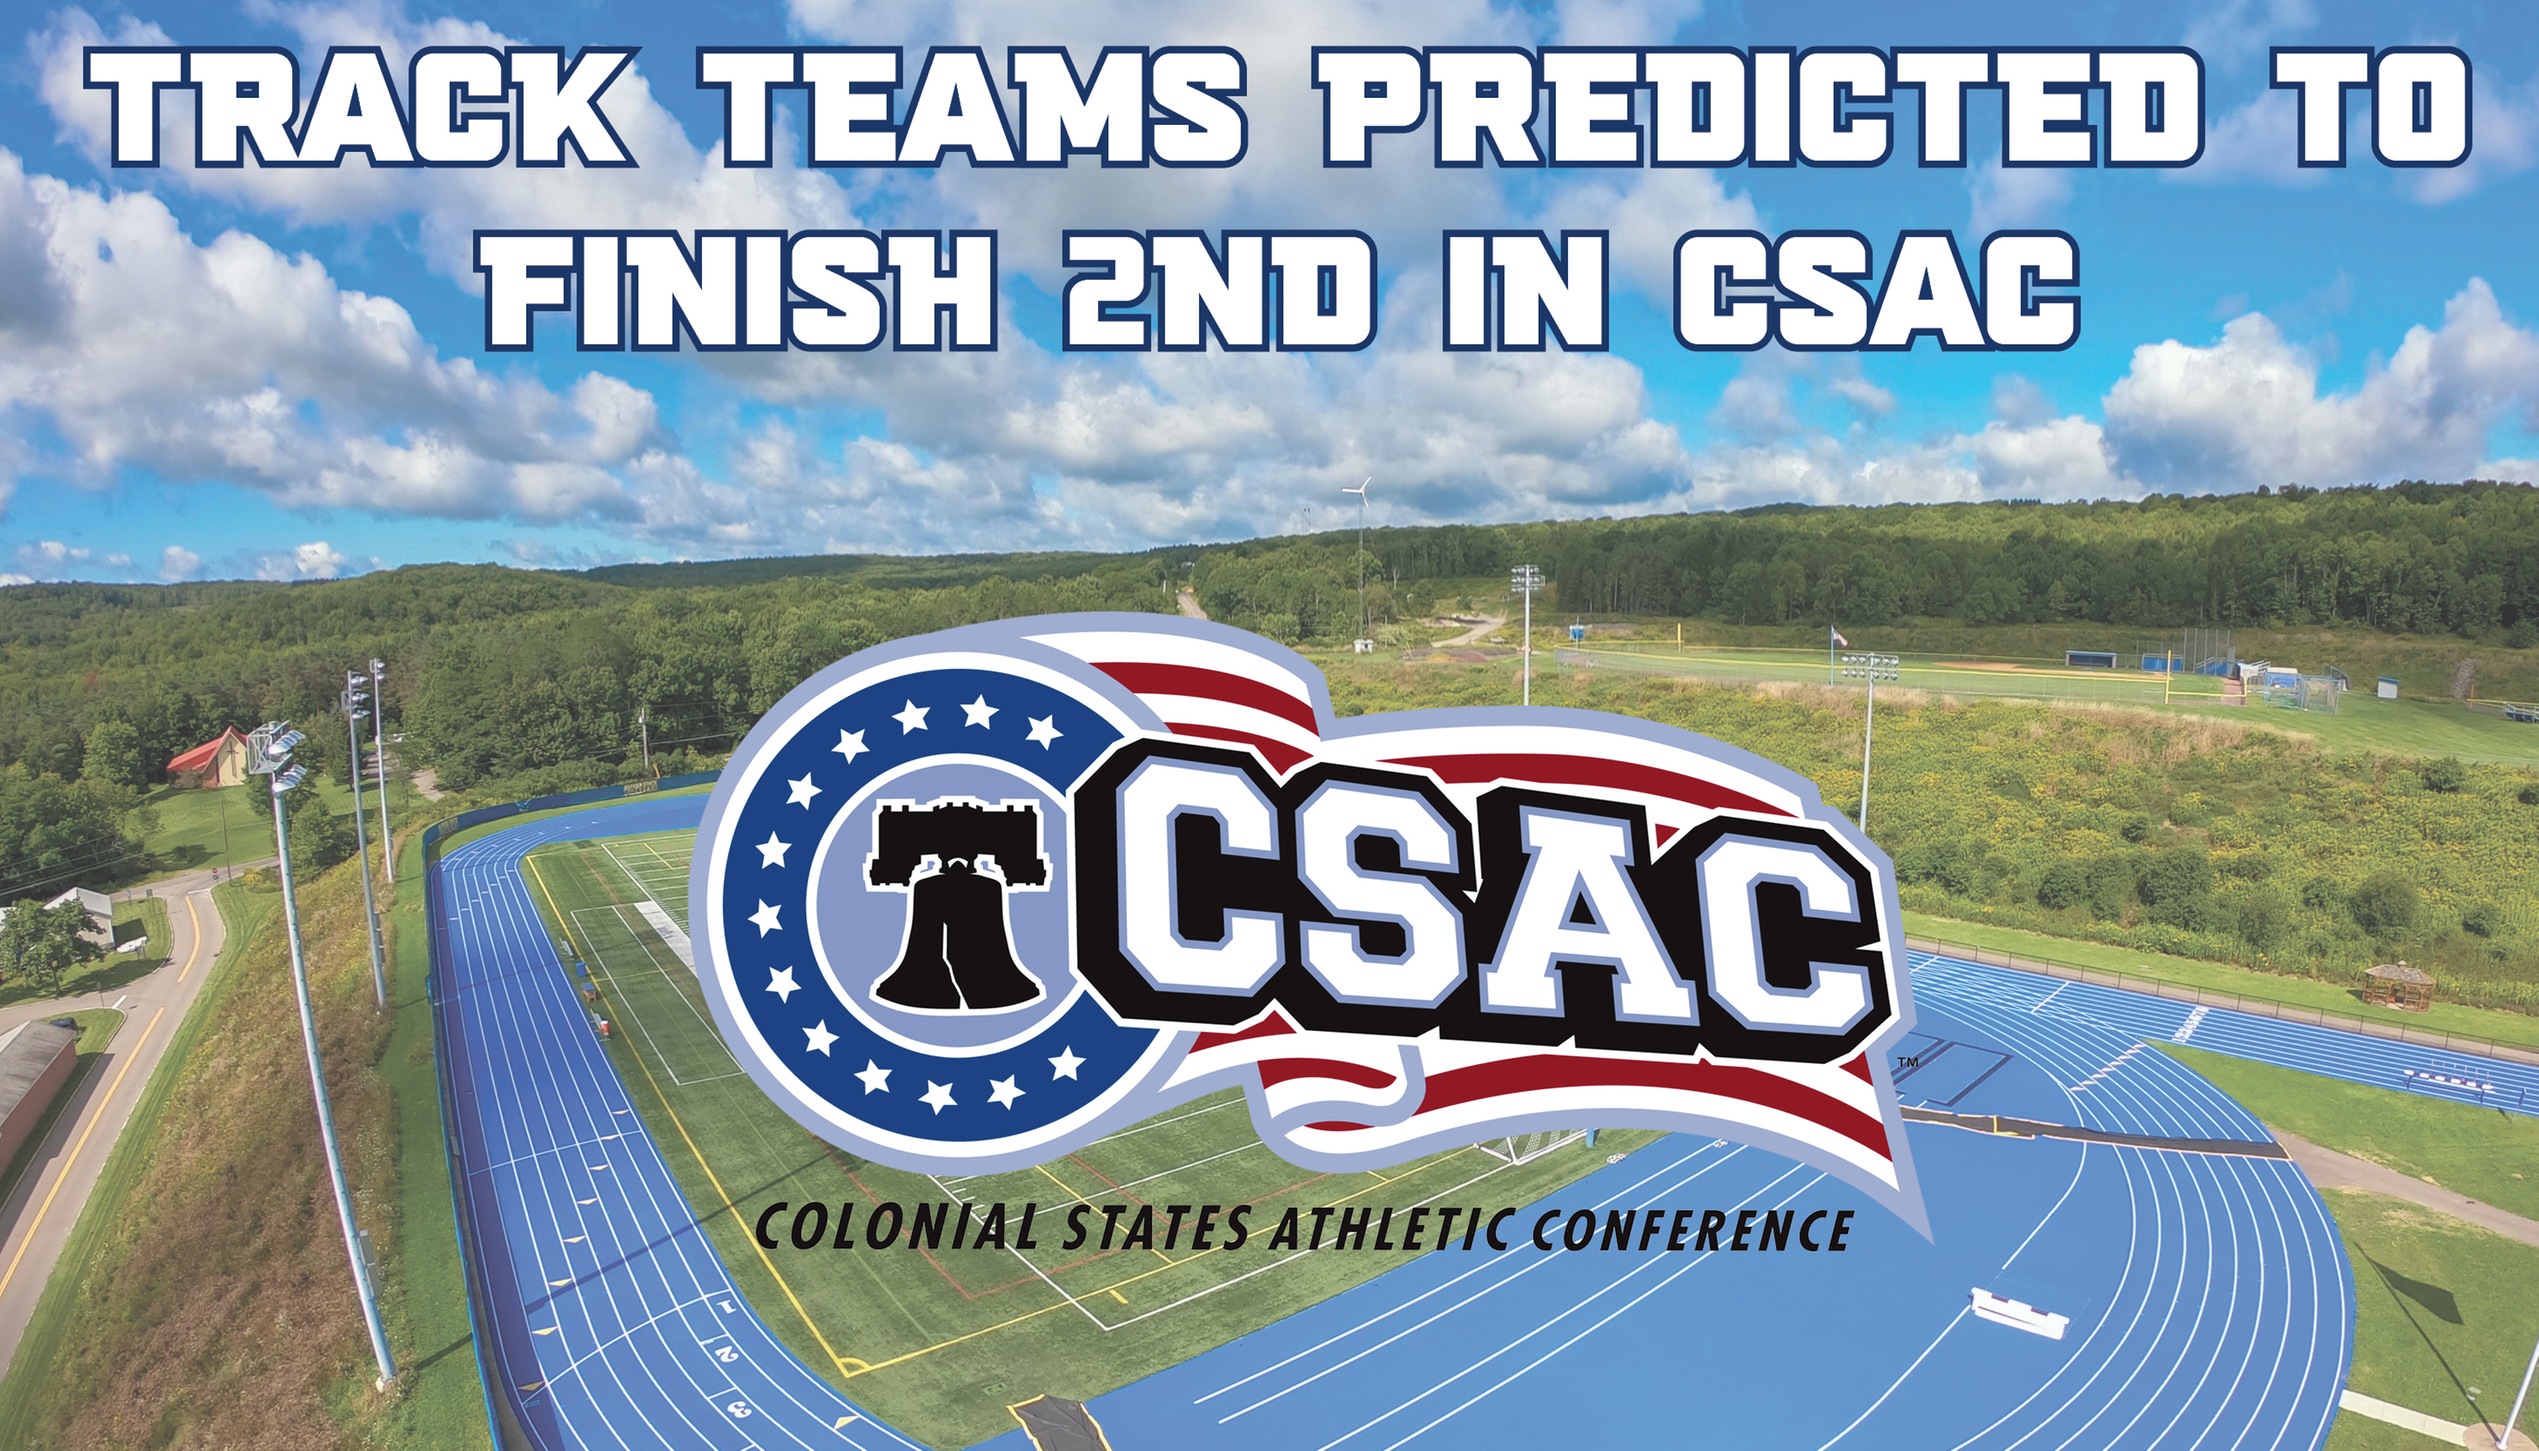 Picture of Pioneer Stadium - Track & Field teams are predicted to finish 2nd in the CSAC